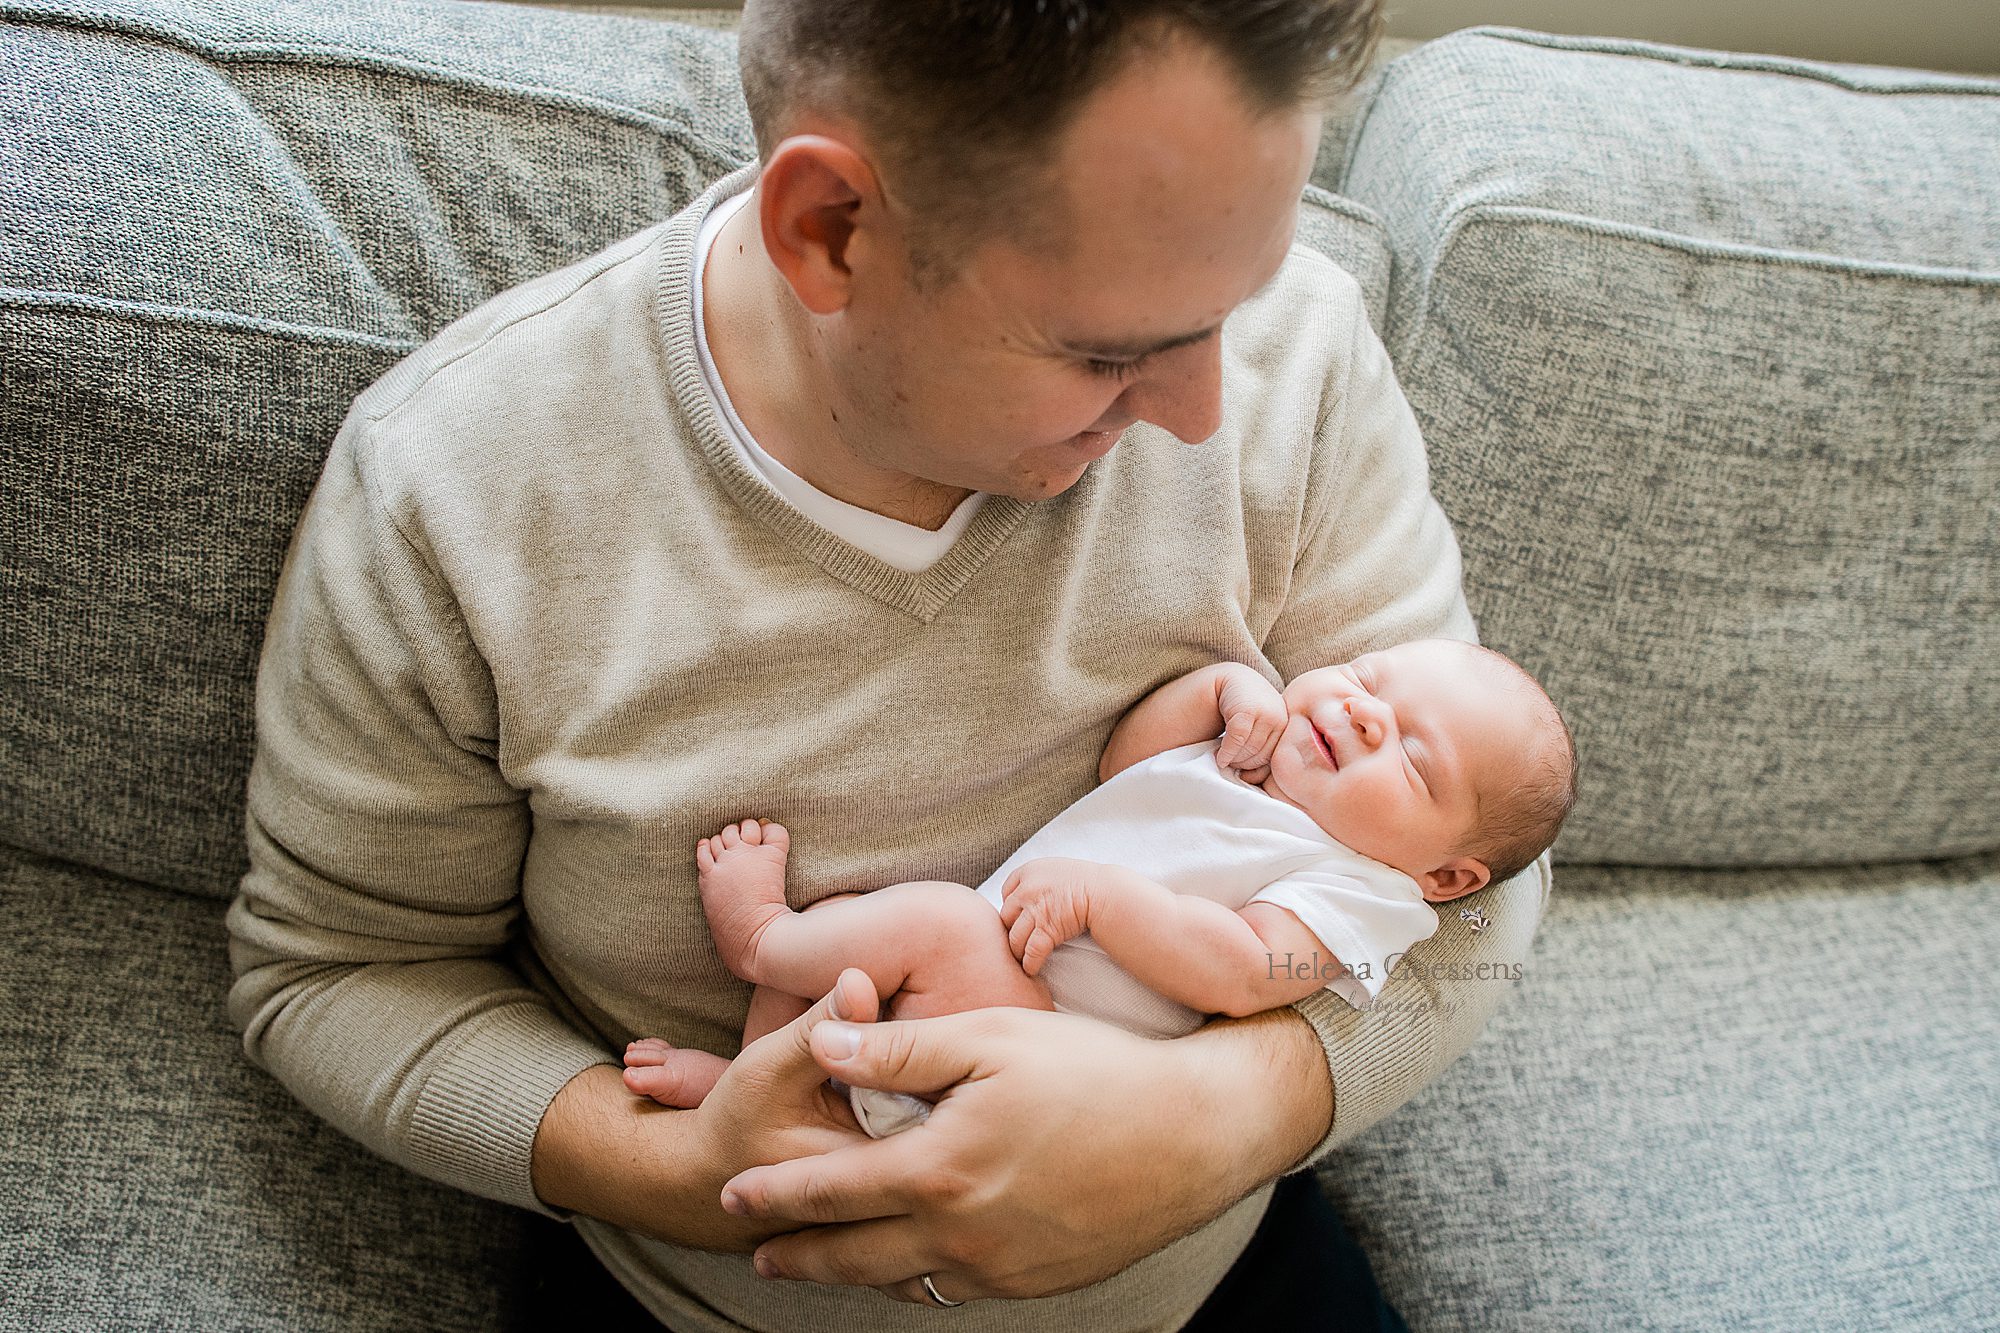 Helena Goessens Photography photographs baby girl and dad during newborn session